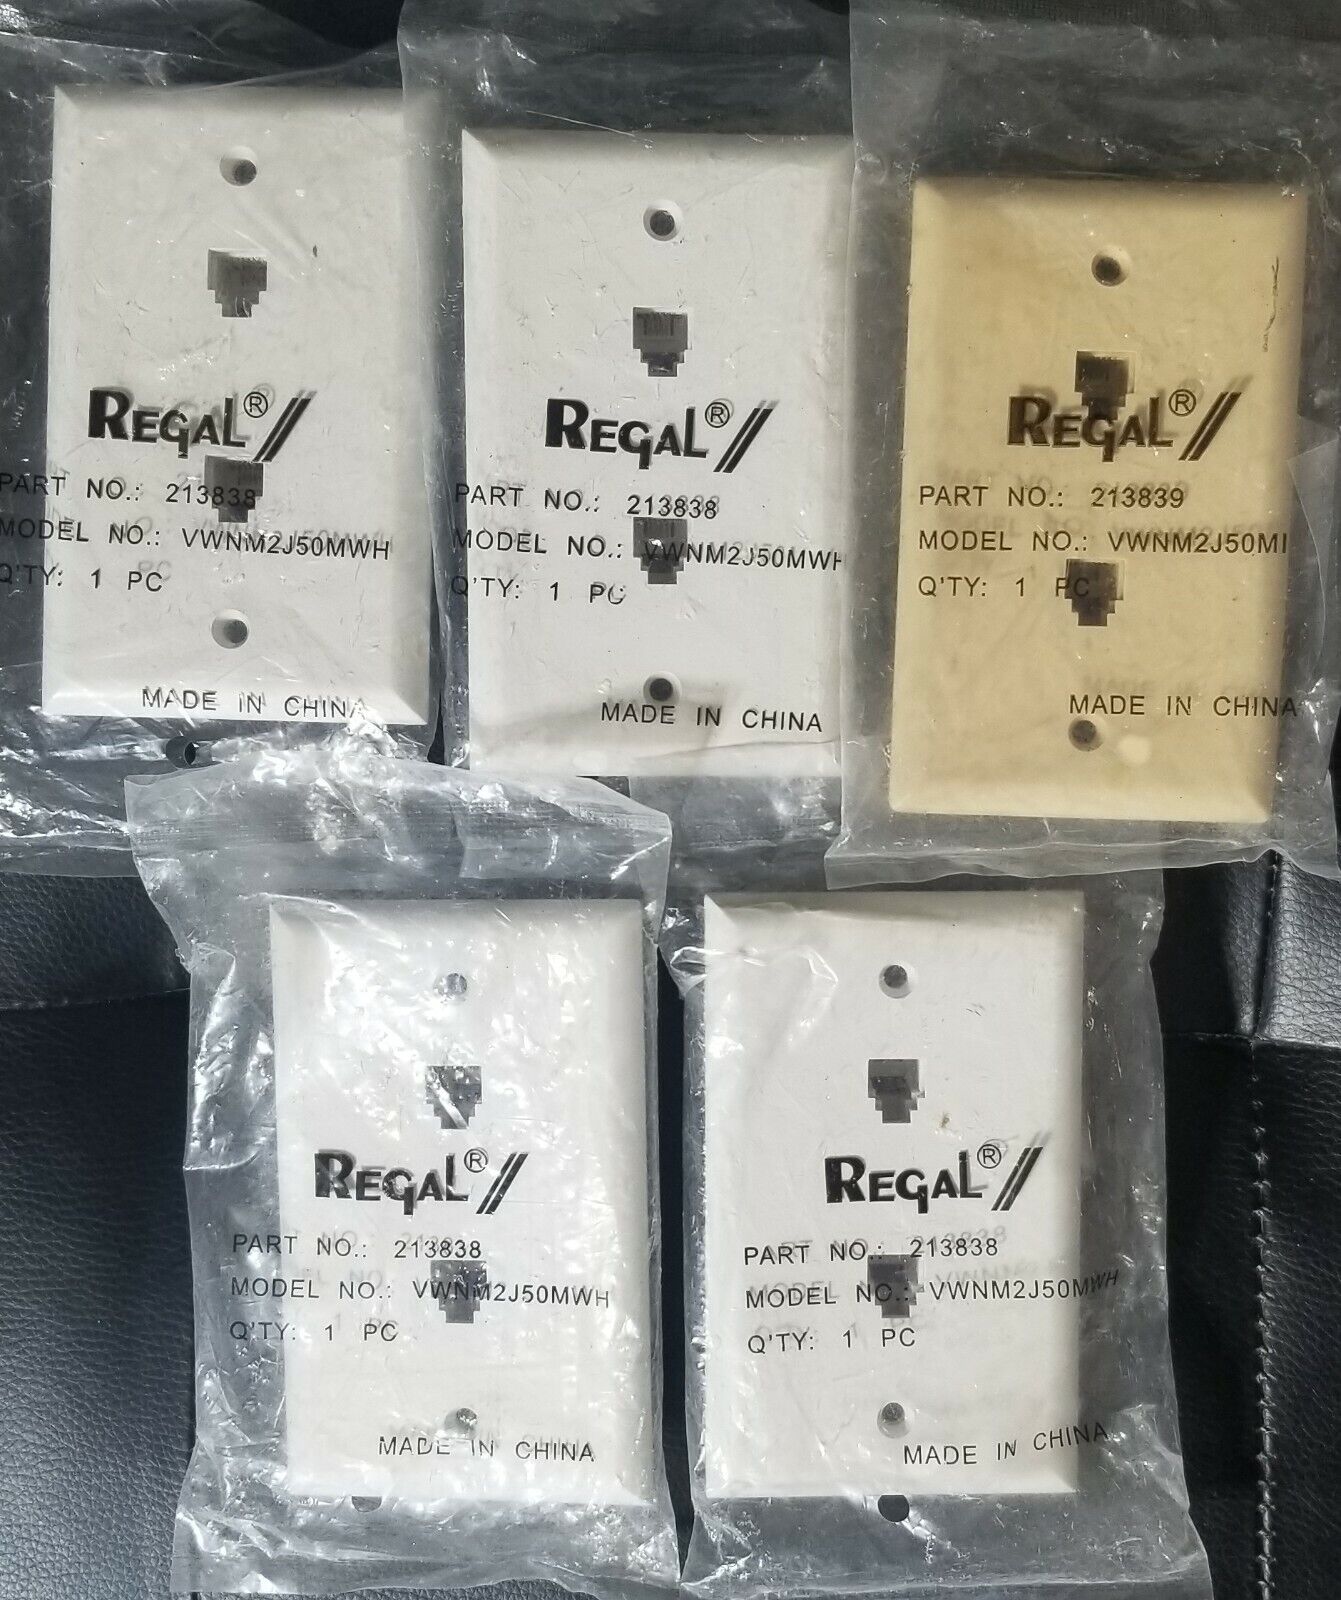 LOT OF 5 🆕🔥Regal Dual Outlet White /Ivory RJ11 Phone Telephone Wall Plate Jack